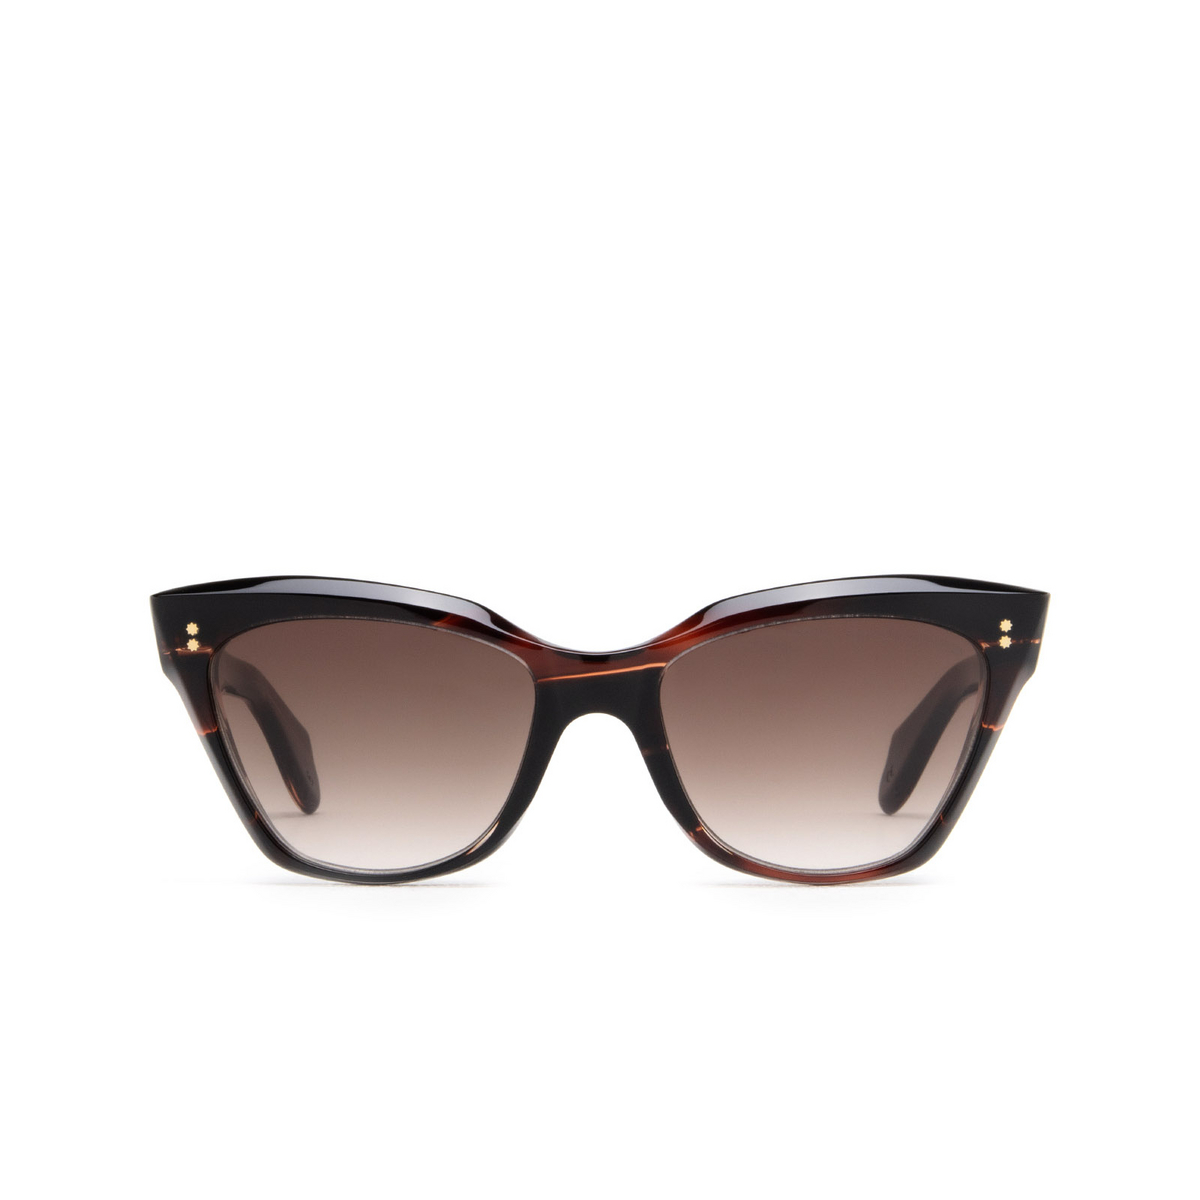 Cutler and Gross 9288 Sunglasses 02 Striped Brown Havana - front view